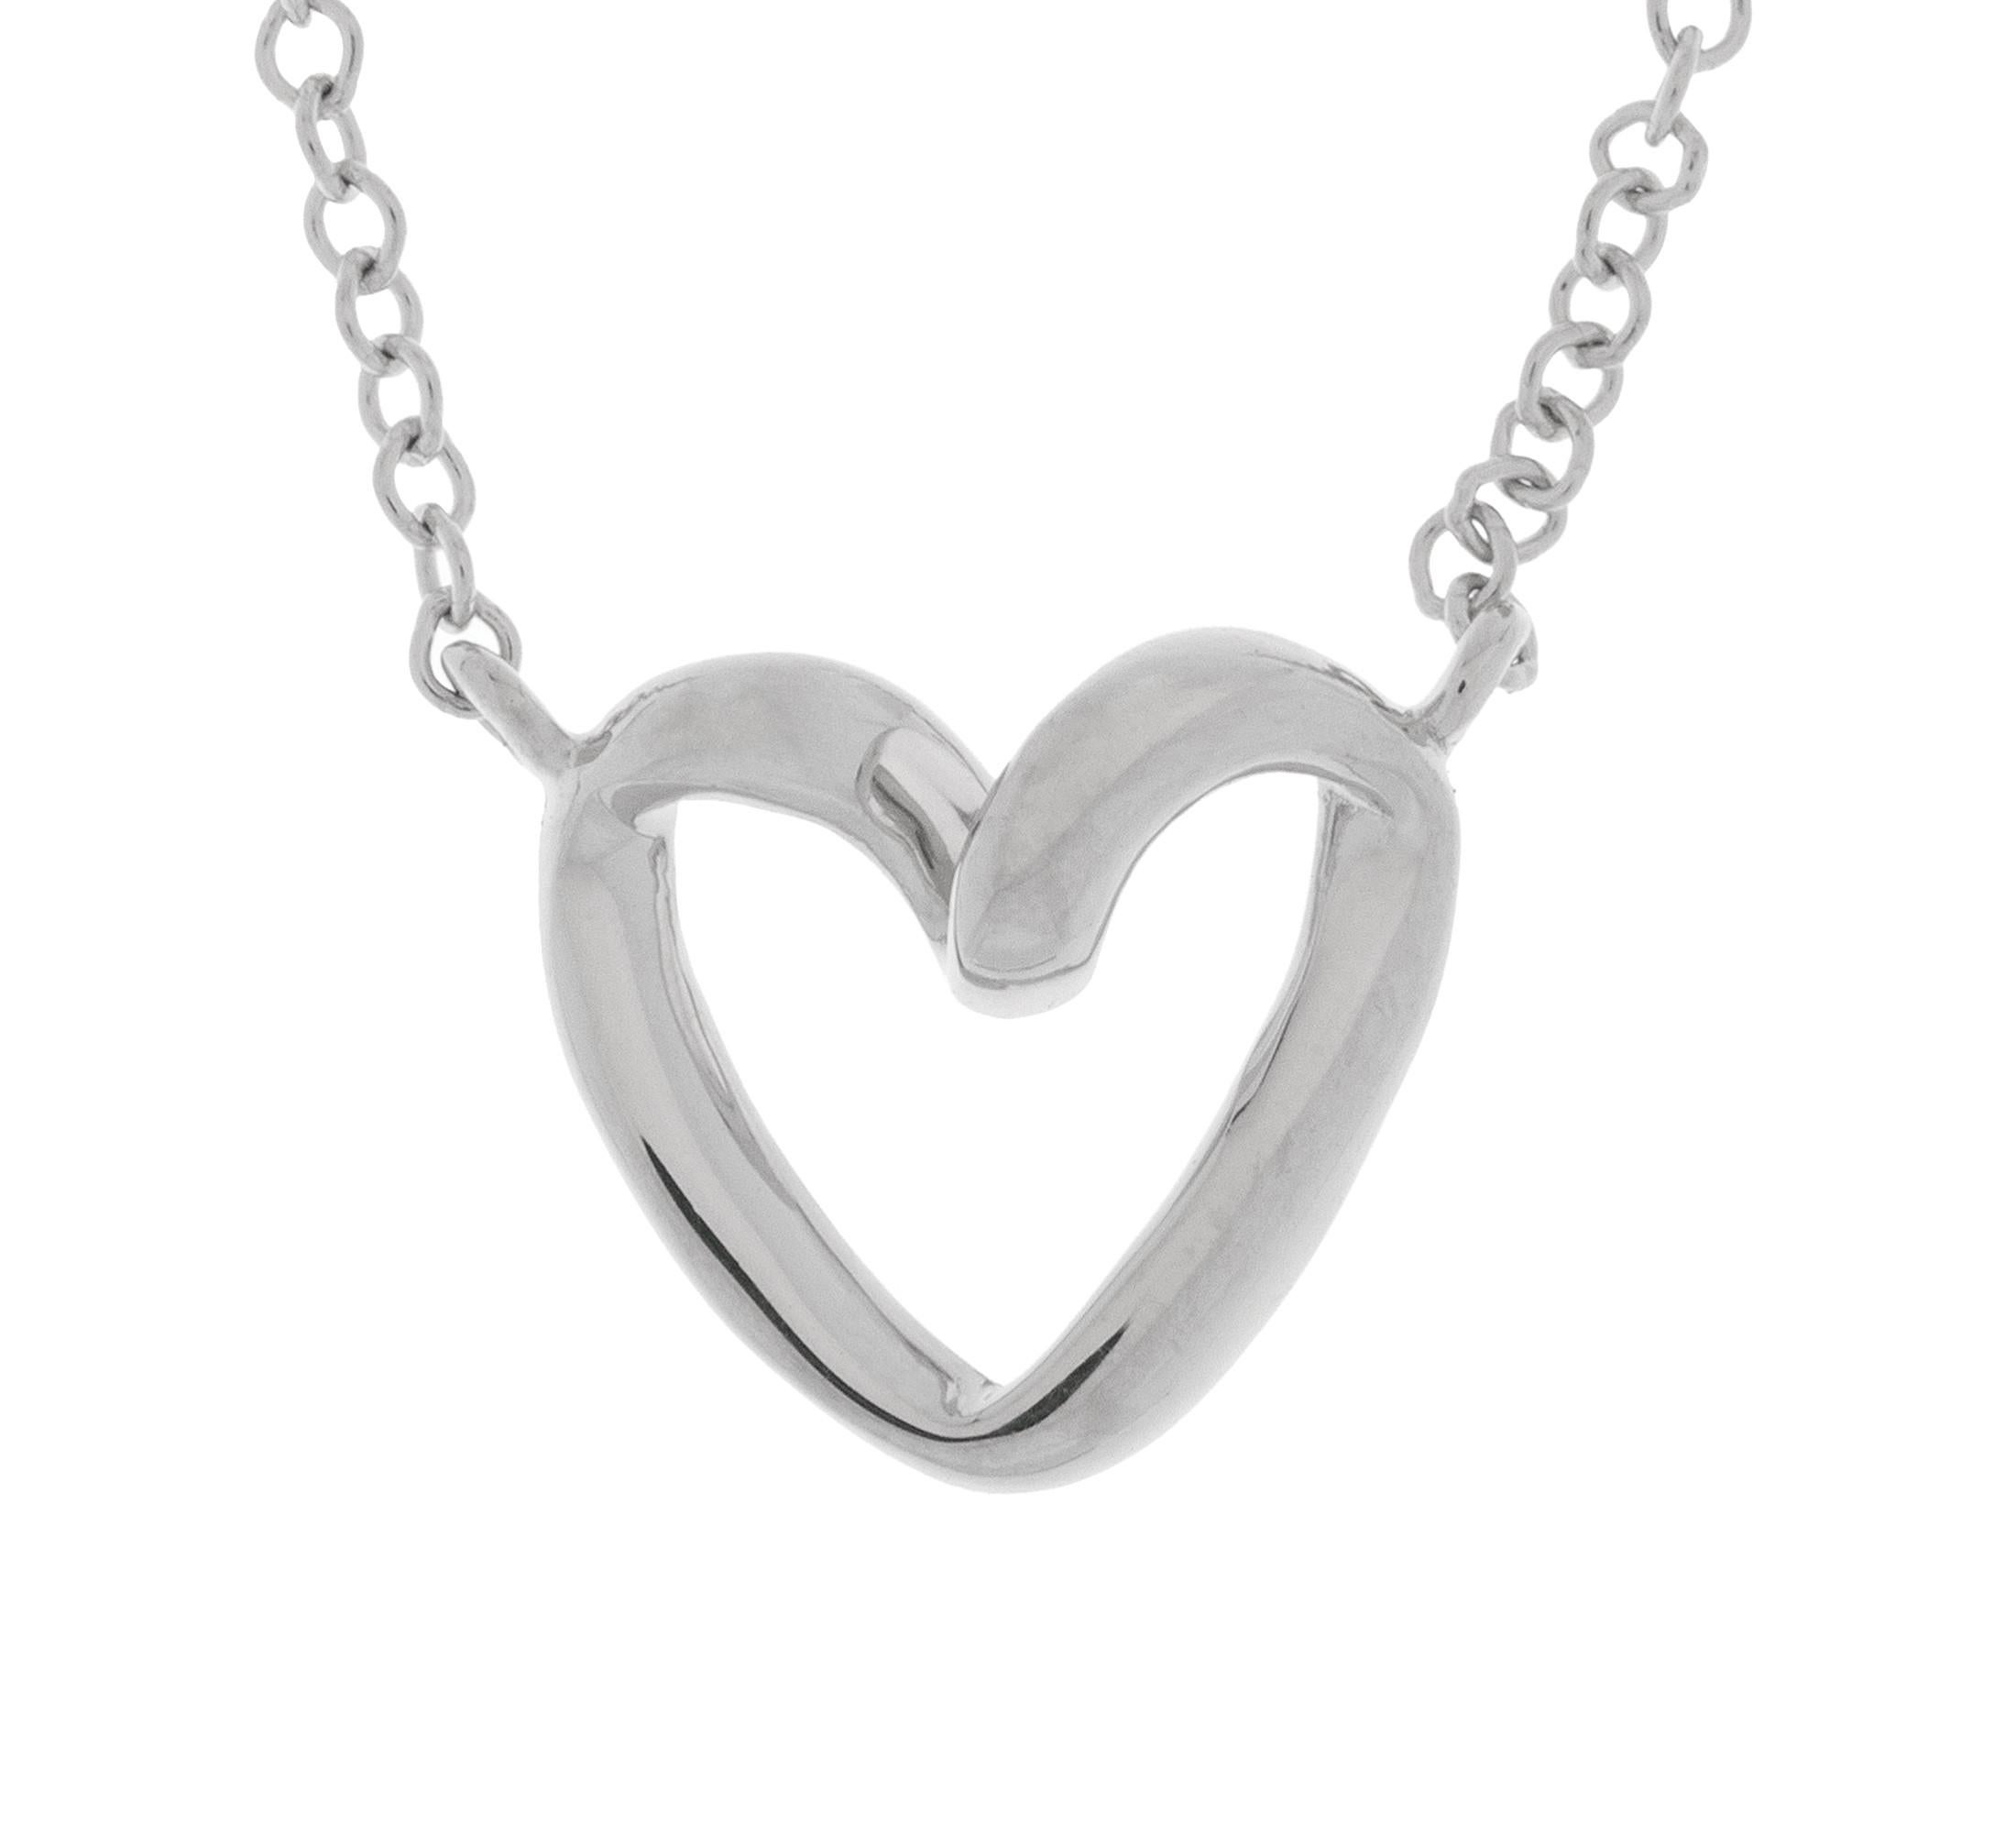 DESCRIPTION
Make a romantic gesture with this fabulous white gold heart pendant and earrings jewellery set. The perfect gift for Christmas, Valentines or simply a birthday treat.

Signed Florelli

Both the pendant and earrings feature an evocative